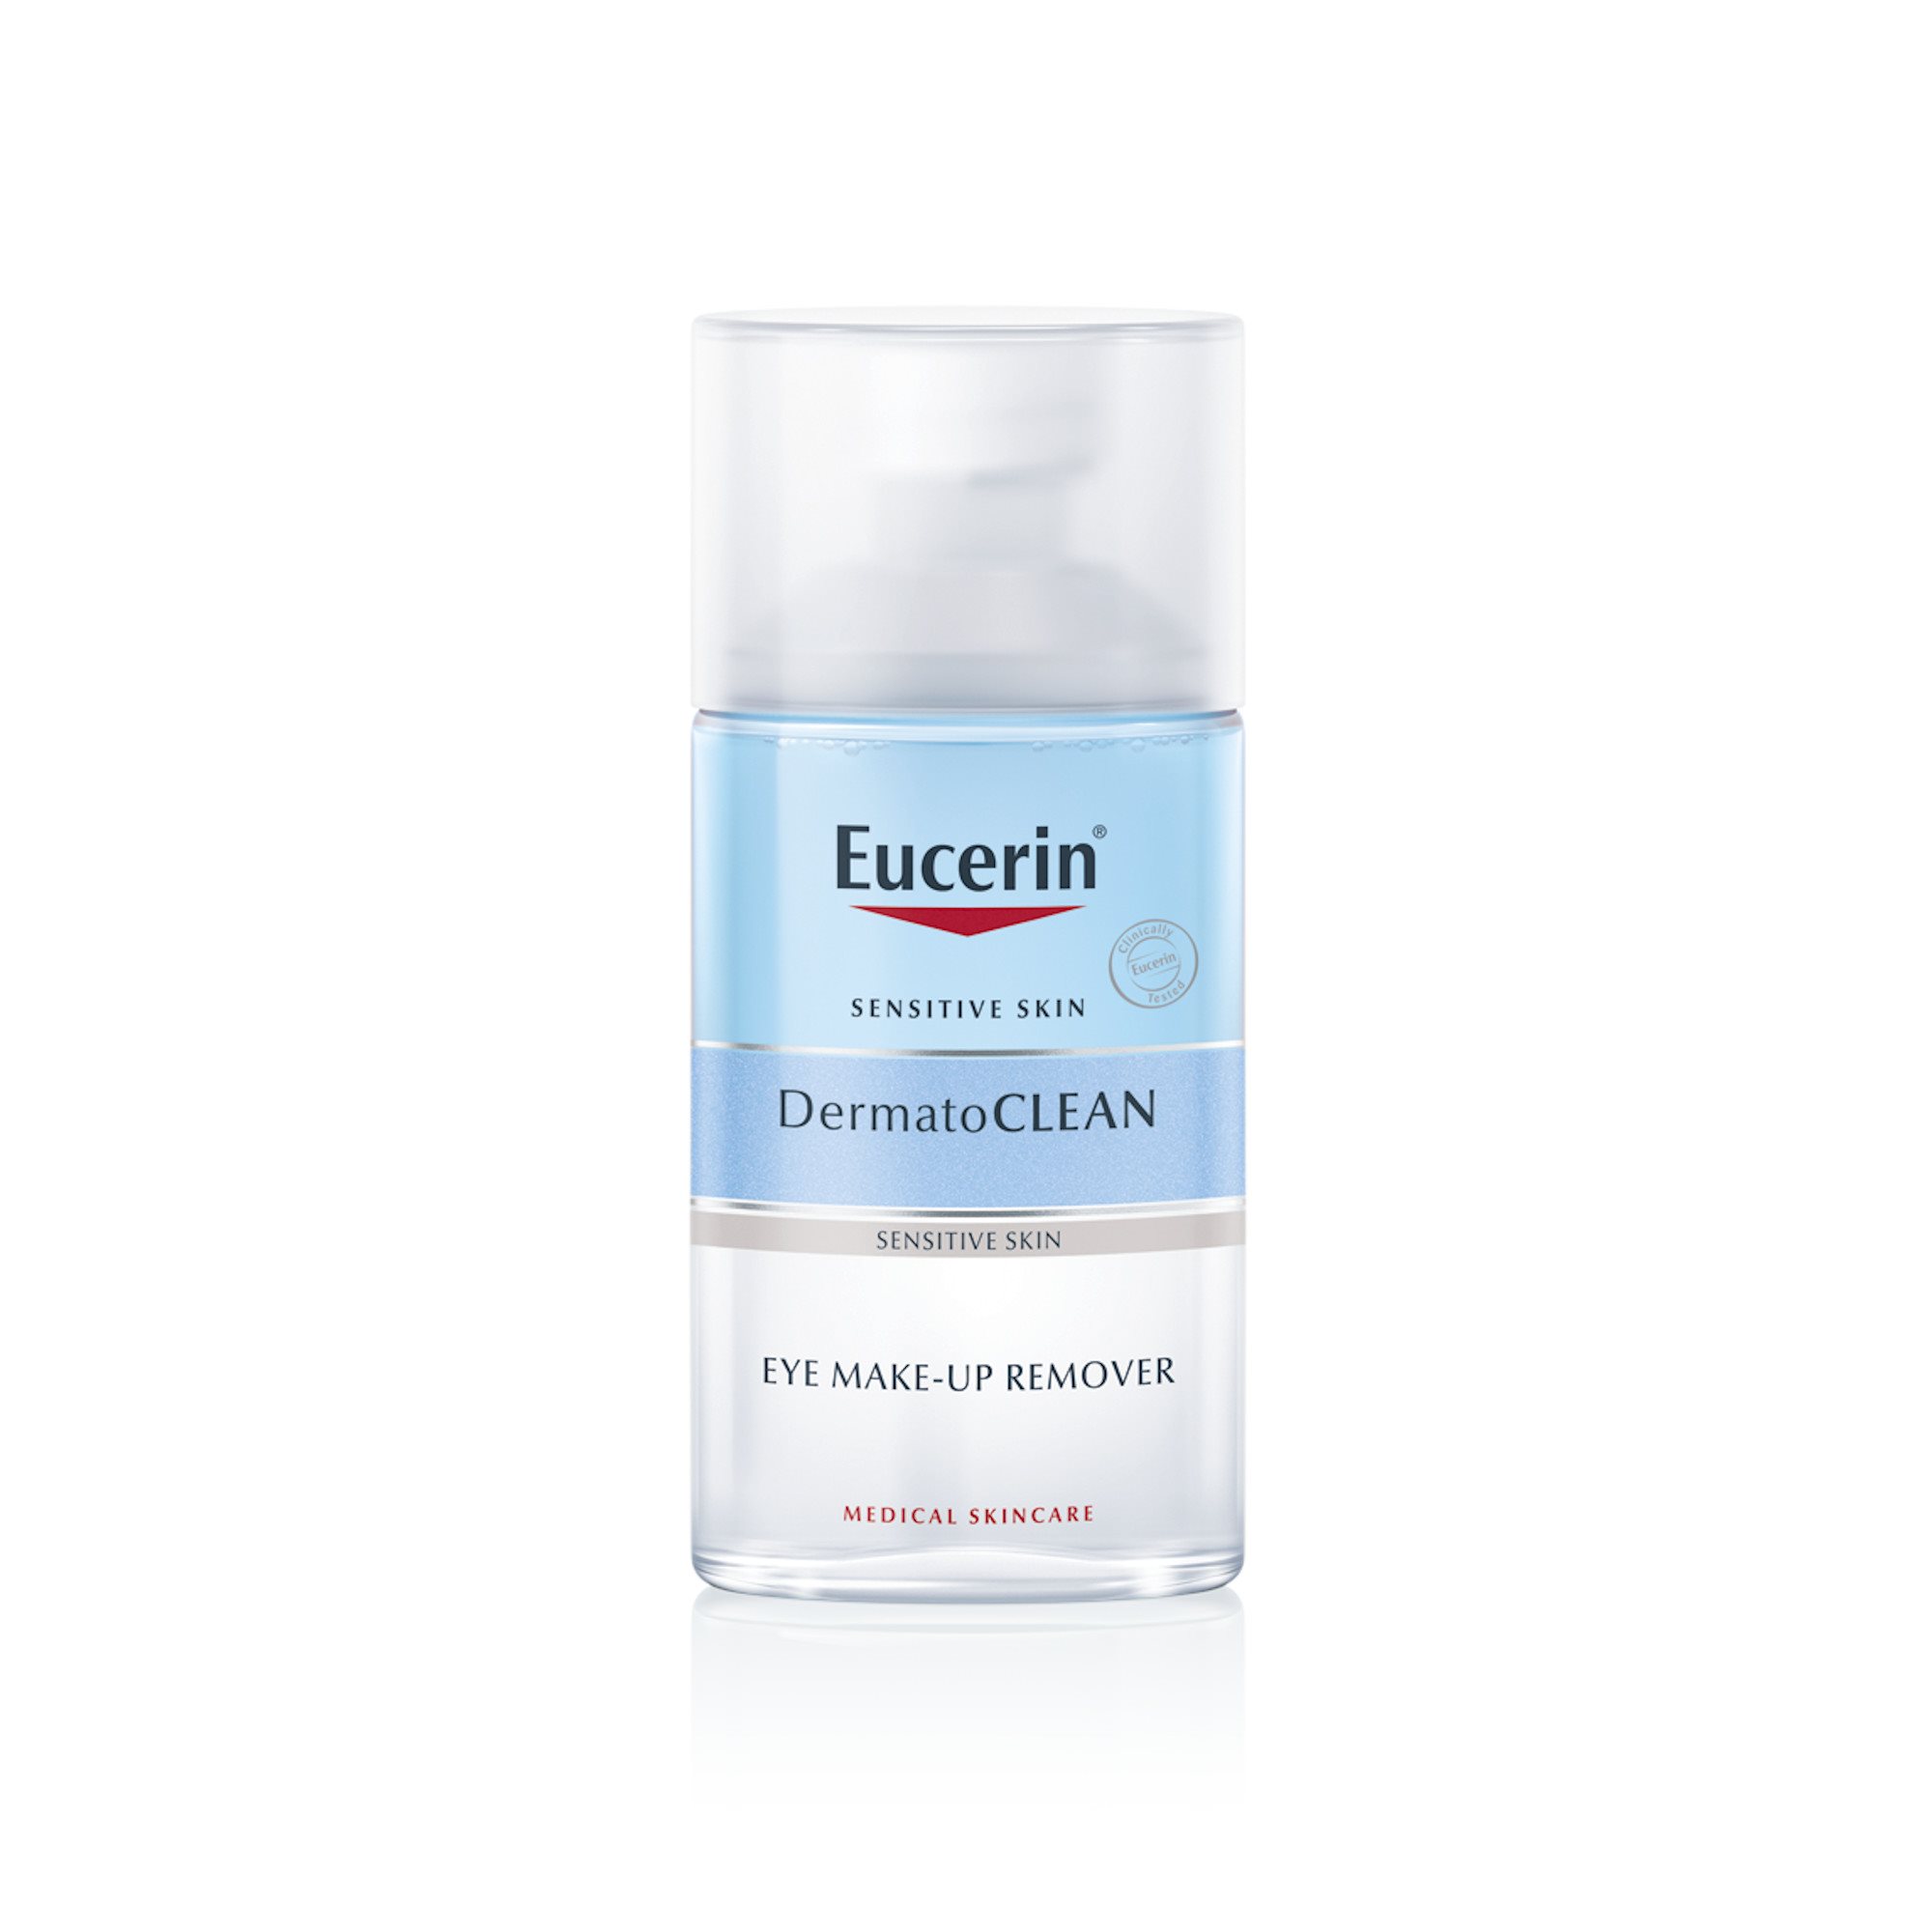 Waterproof mascara remover from Eucerin